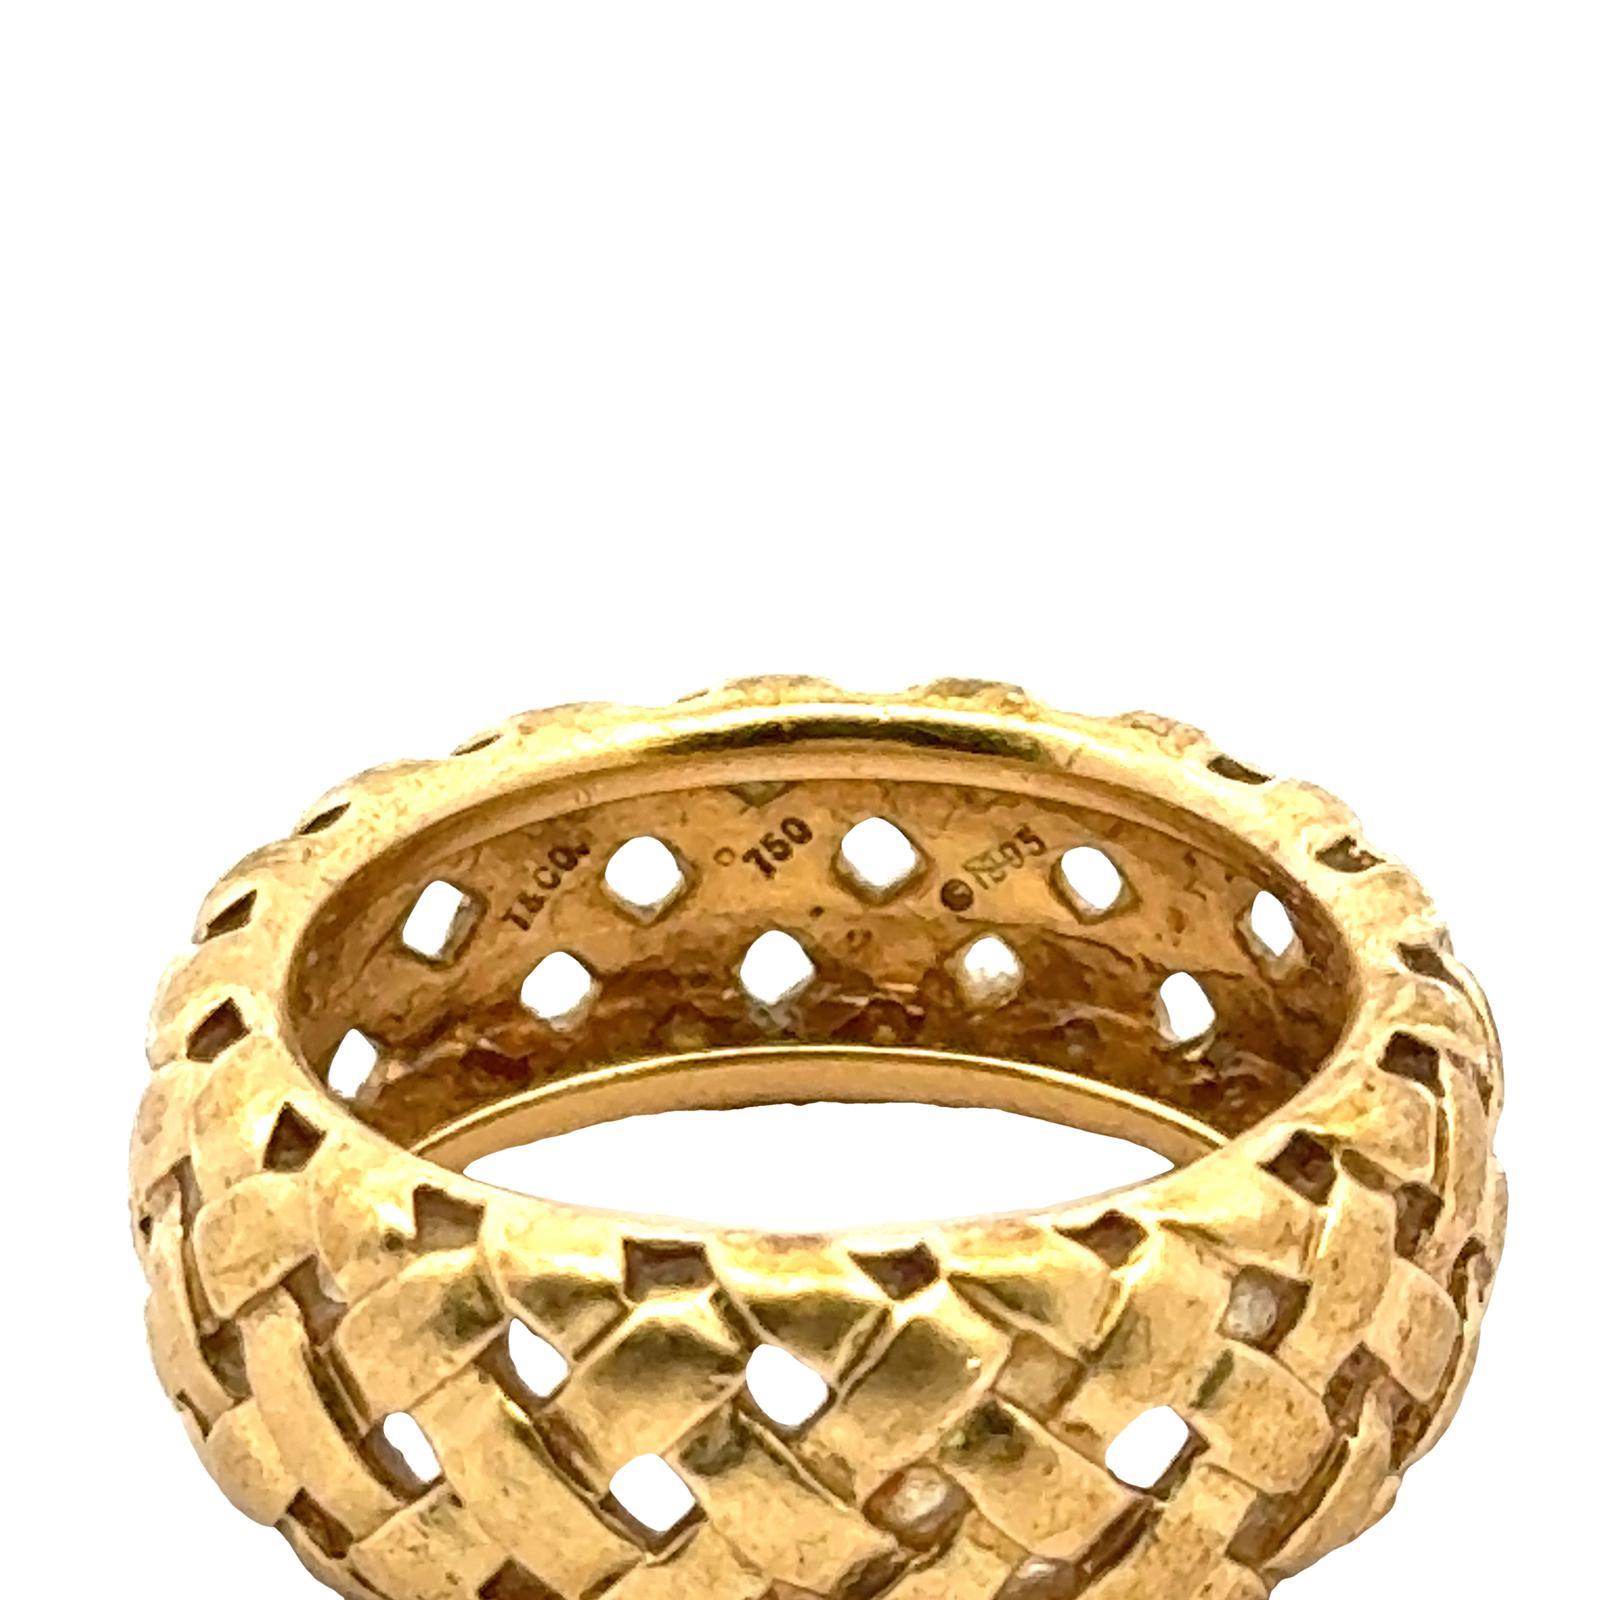 1995 Tiffany & Co. Basket Weave 18 Karat Yellow Gold Band Ring, Size 8 For Sale 2